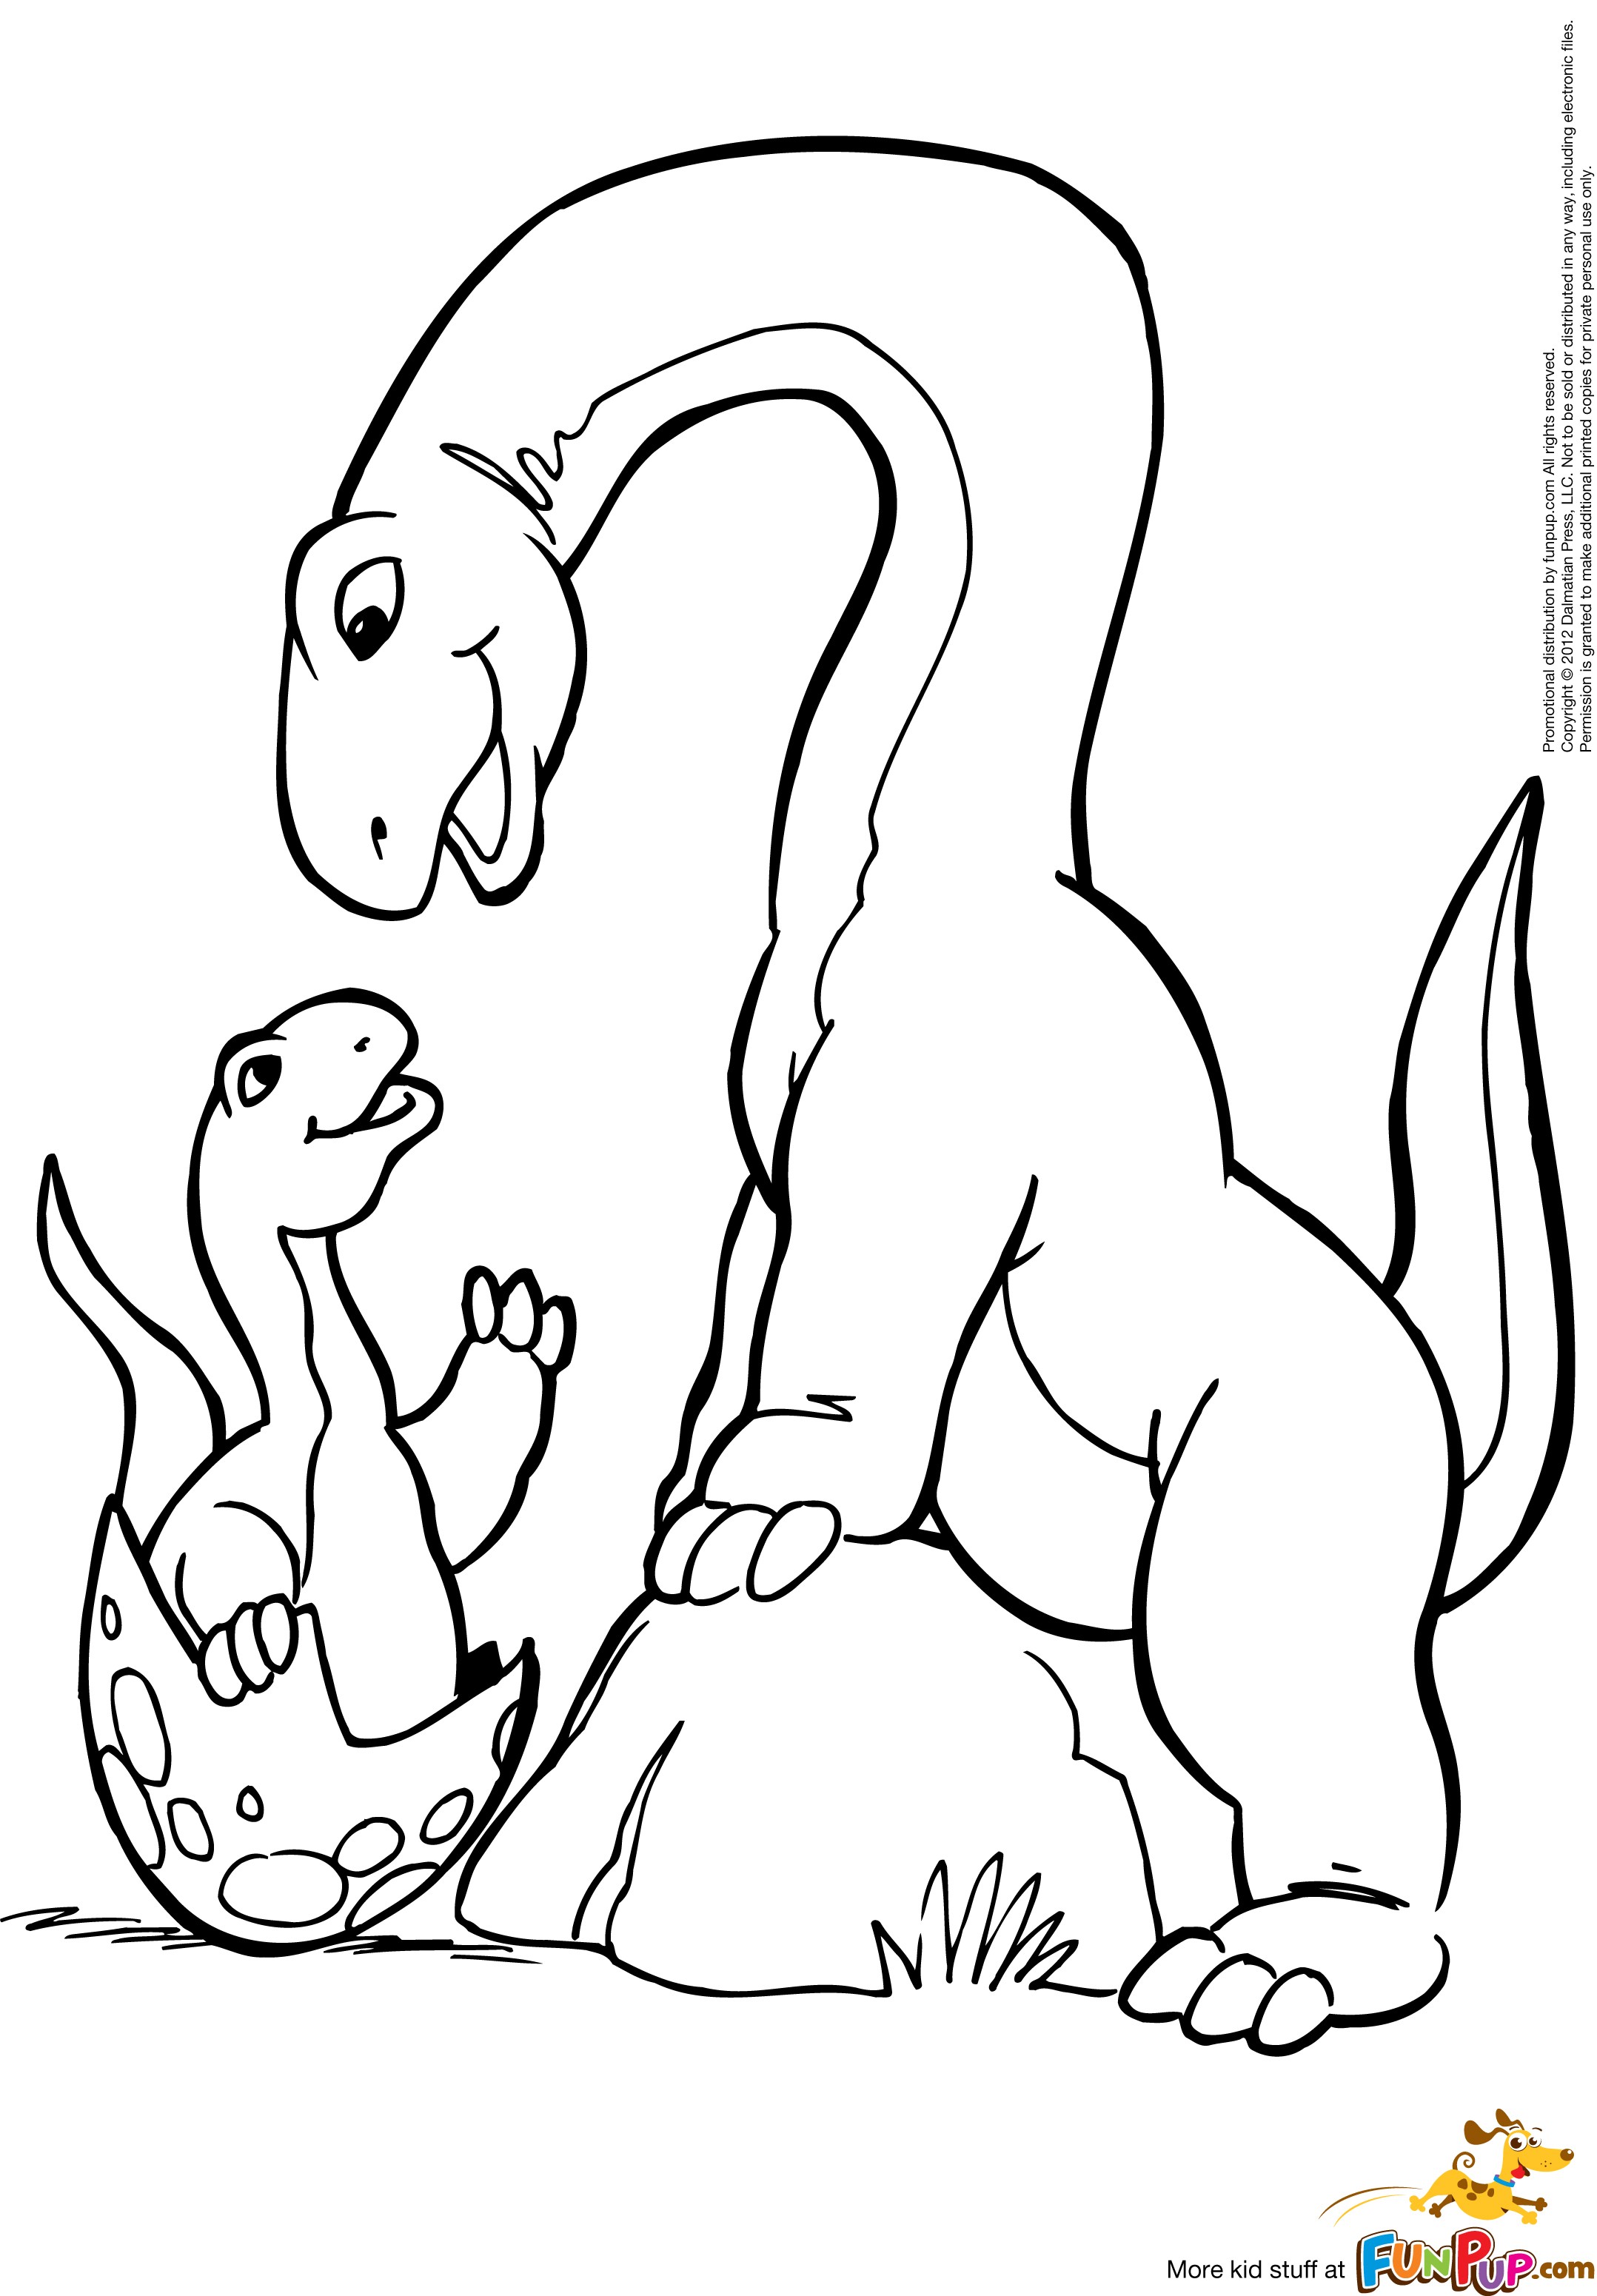 Funny Brachiosaurus Coloring Page